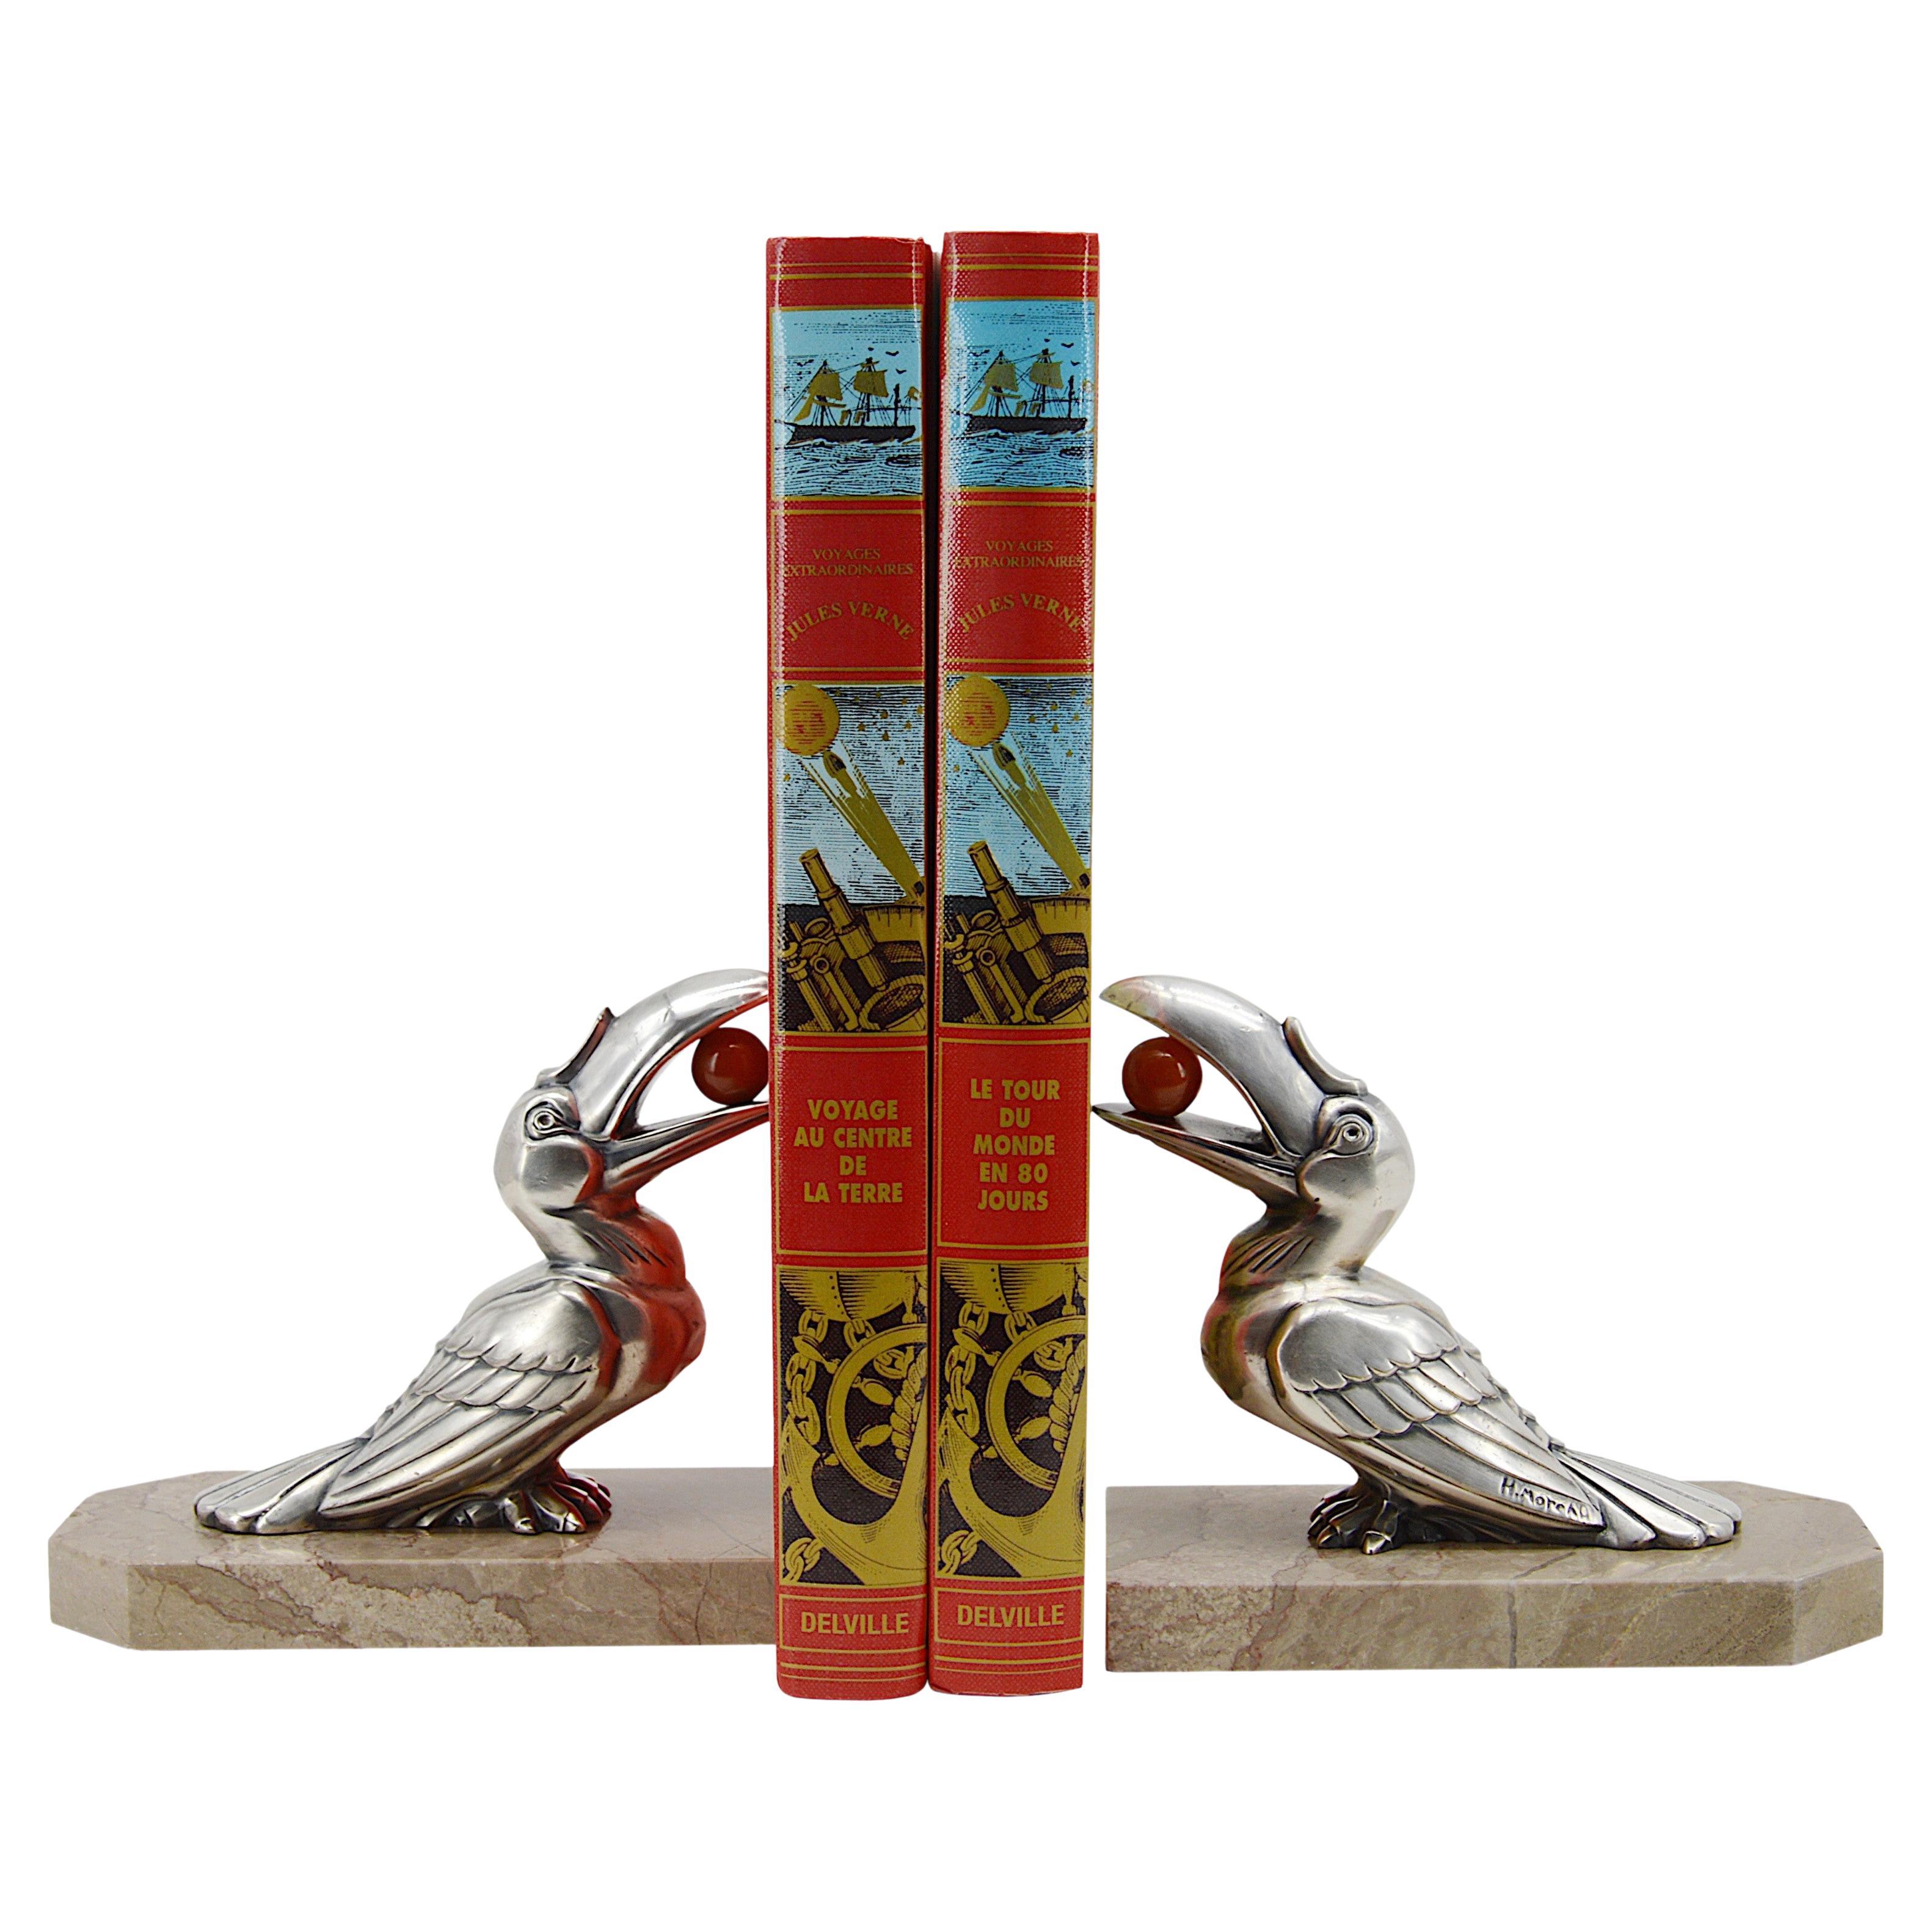 French Art Deco toucans bookends, France, 1930's. Bronze, bakelite and marble. Silver plated bronze. Bakelite balls. Each - Height: 5.3